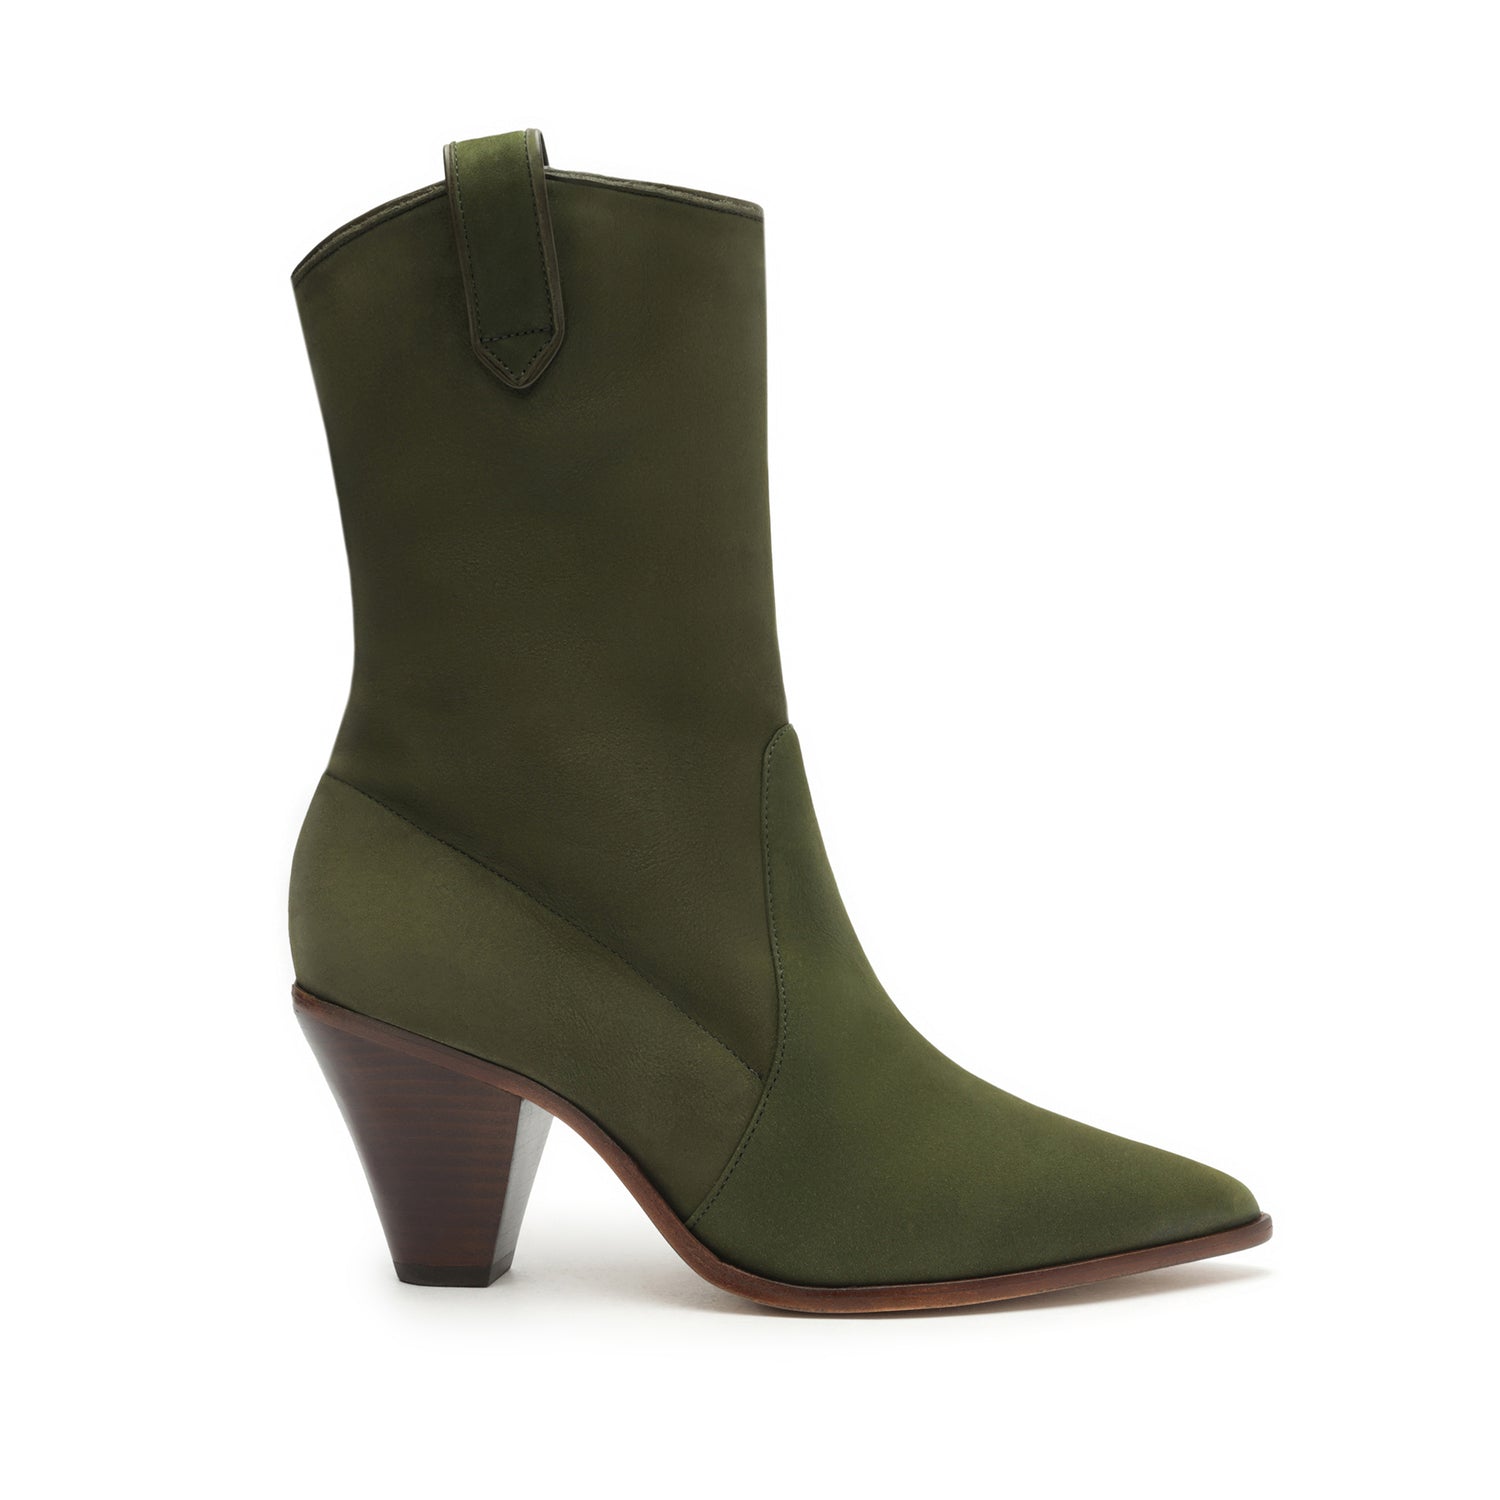 Mackie Nubuck Leather Bootie Booties OLD 5 Military Green Nubuck Leather - Schutz Shoes